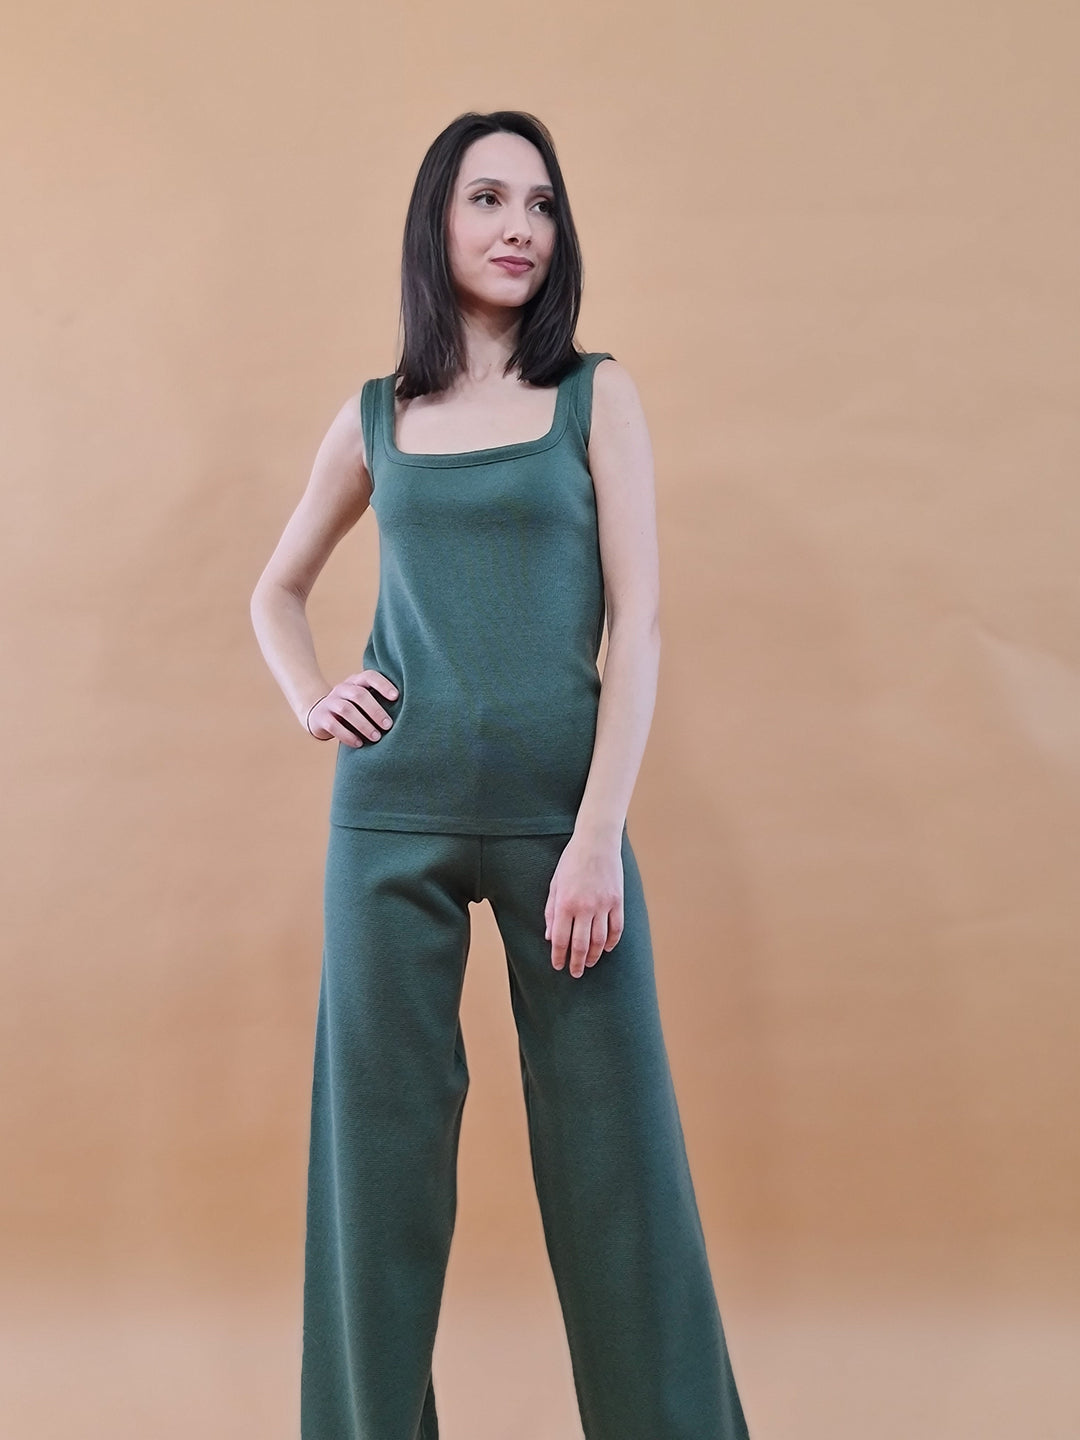 Confident woman in green sleeveless top and wide-leg pants against beige background